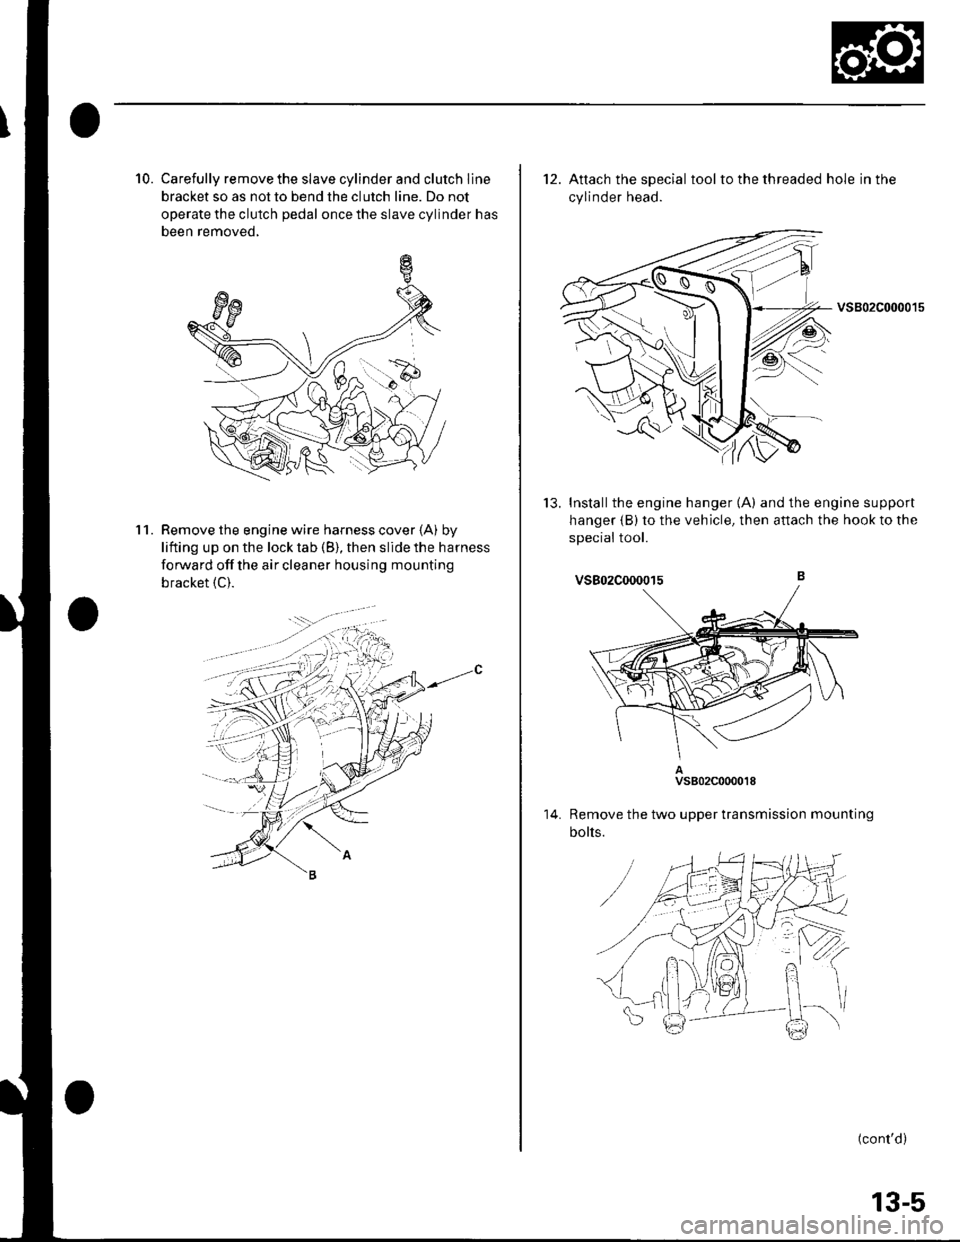 HONDA CIVIC 2003 7.G Owners Guide 10. Carefully remove the slave cylinder and clutch line
bracket so as not to bend the clutch line. Do not
operate the clutch pedal once the slave cylinder has
been removed,
Remove the engine wire harn